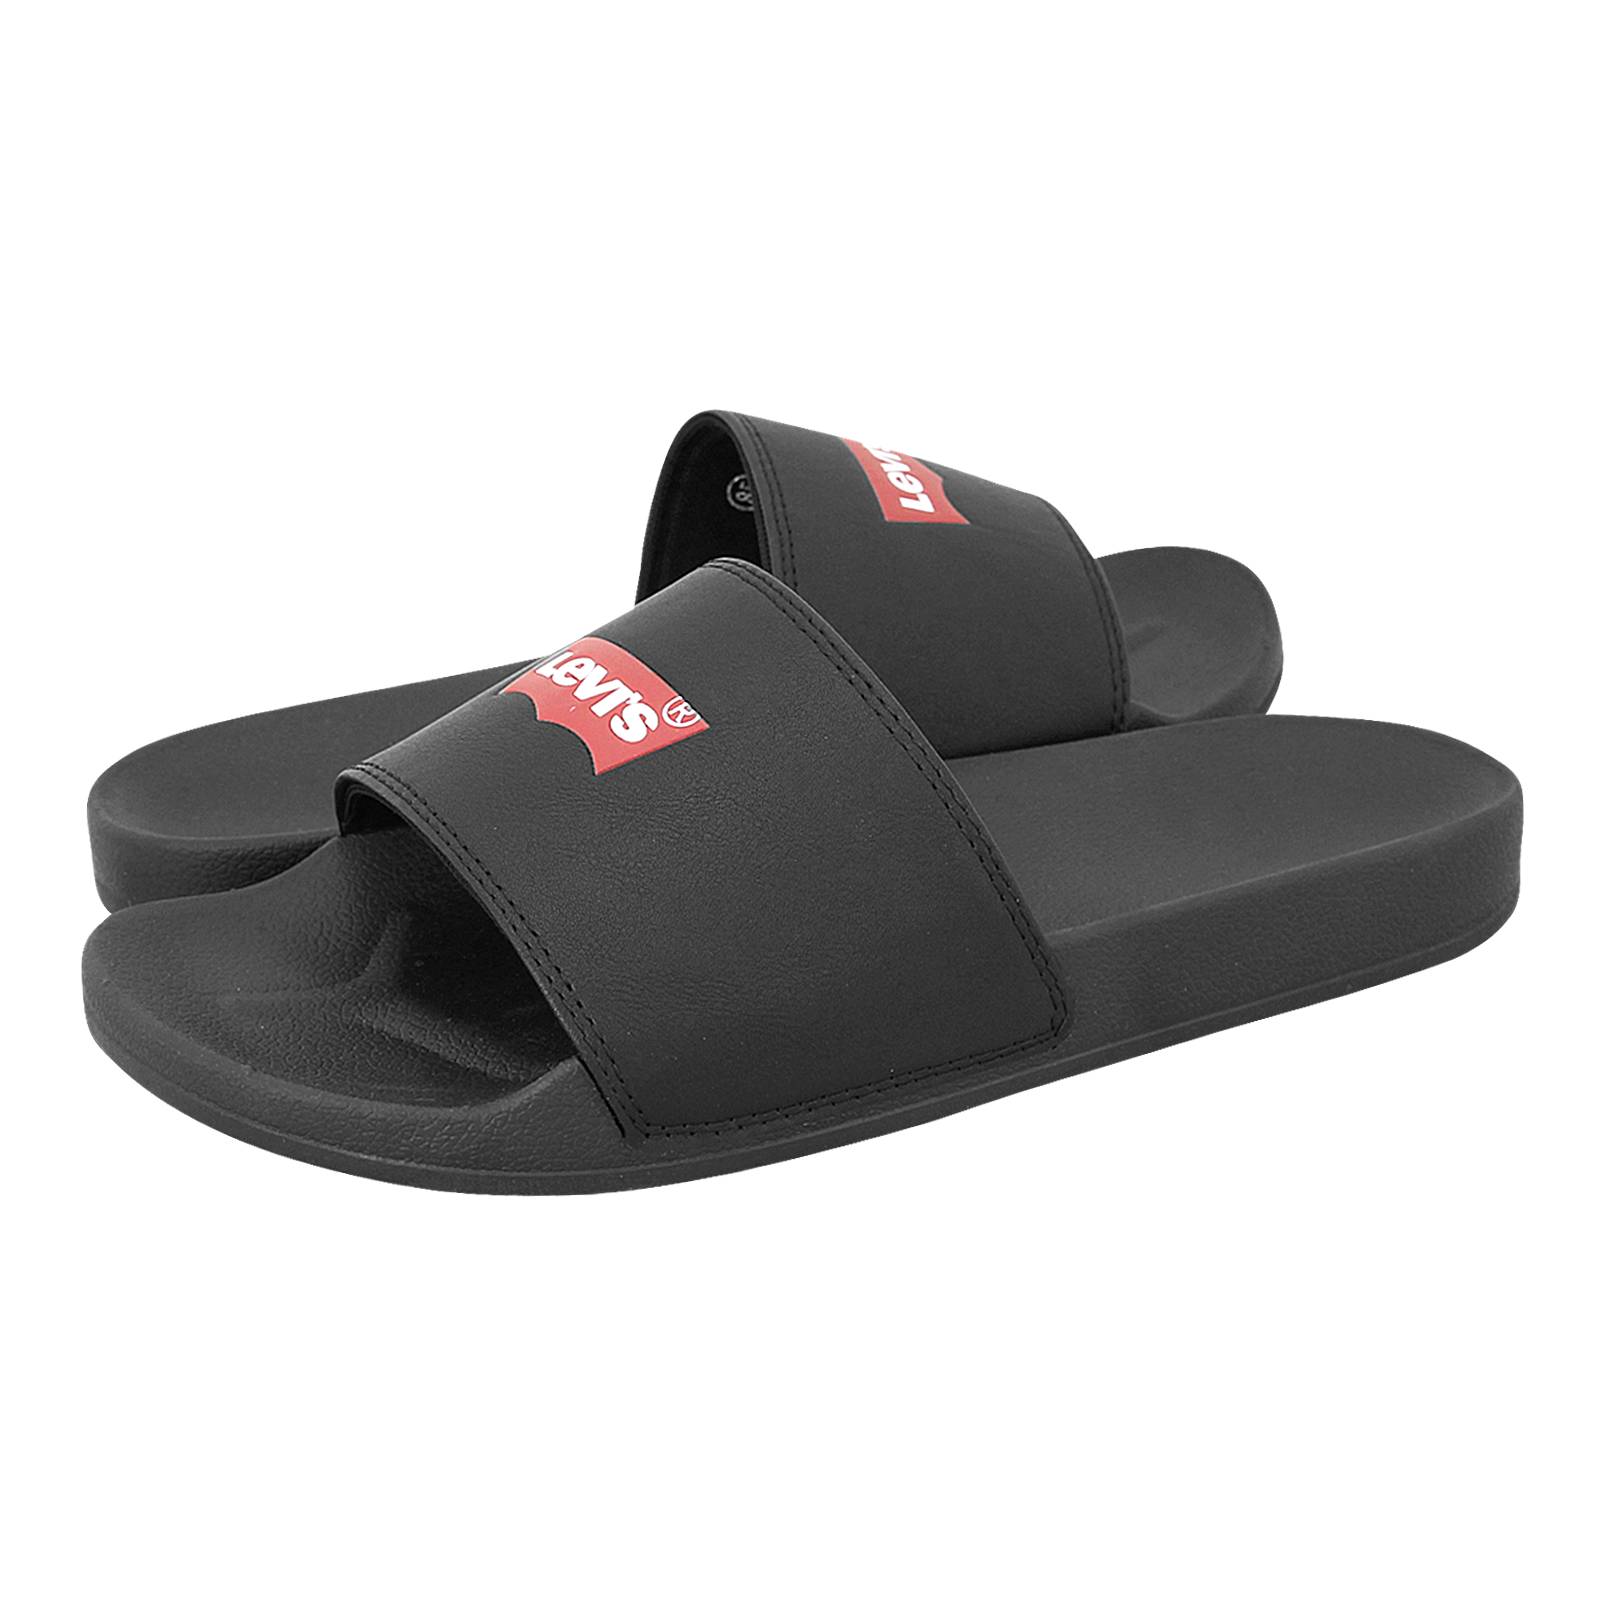 June Batwing - Levi's Men's sandals made of synthetic leather - Gianna  Kazakou Online